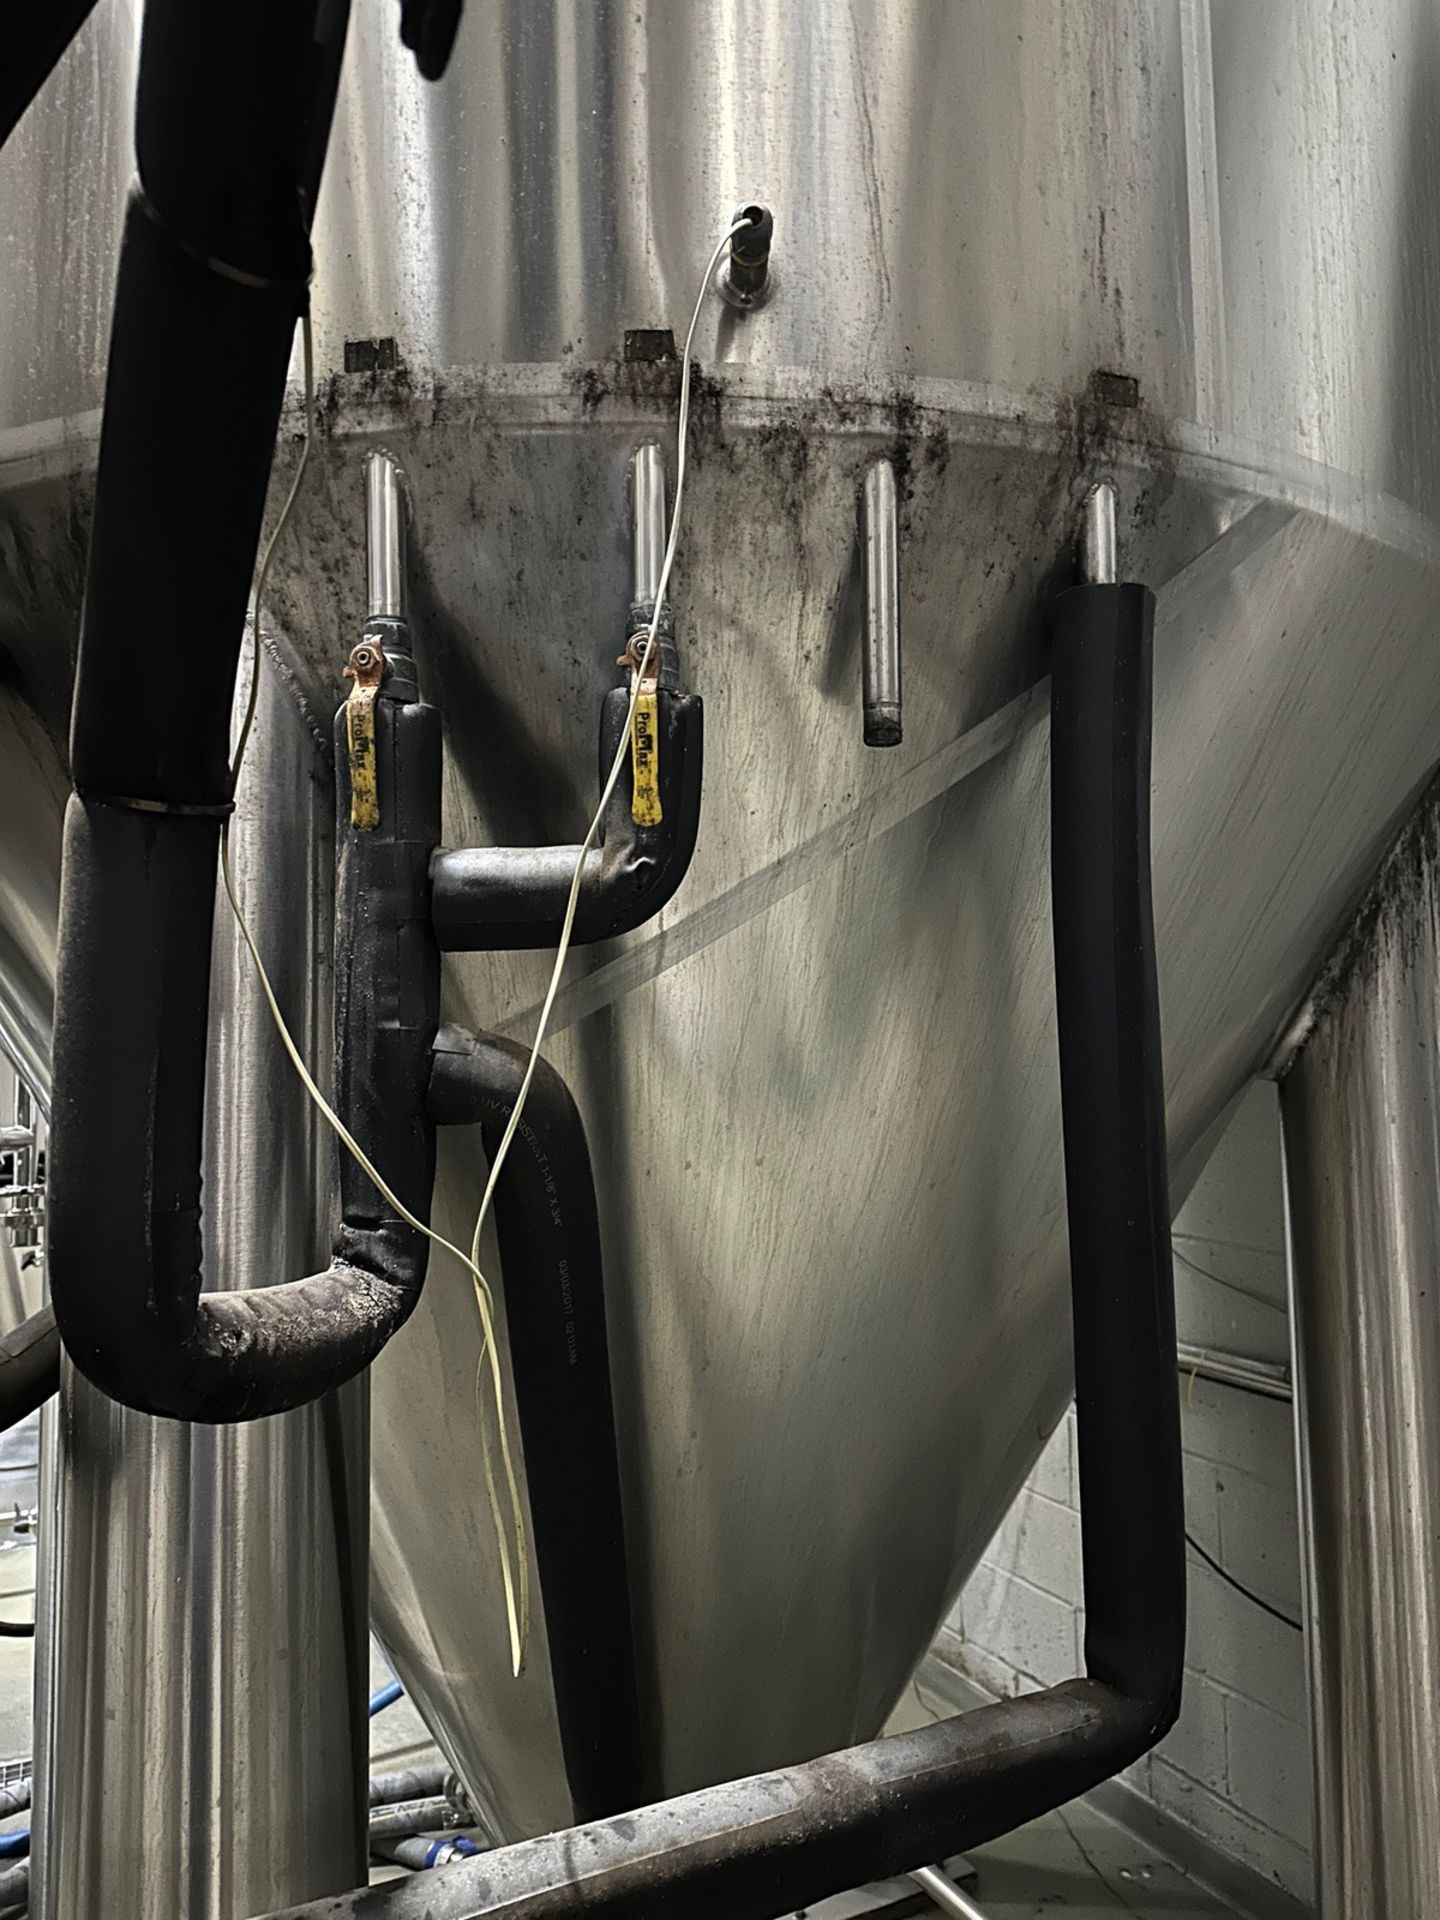 2016 Prospero SK 60 BBL Fermenter, Glycol Jacketed, Approx 7ft ID x 16ft OAH, S/N: 16100538 - Image 6 of 7